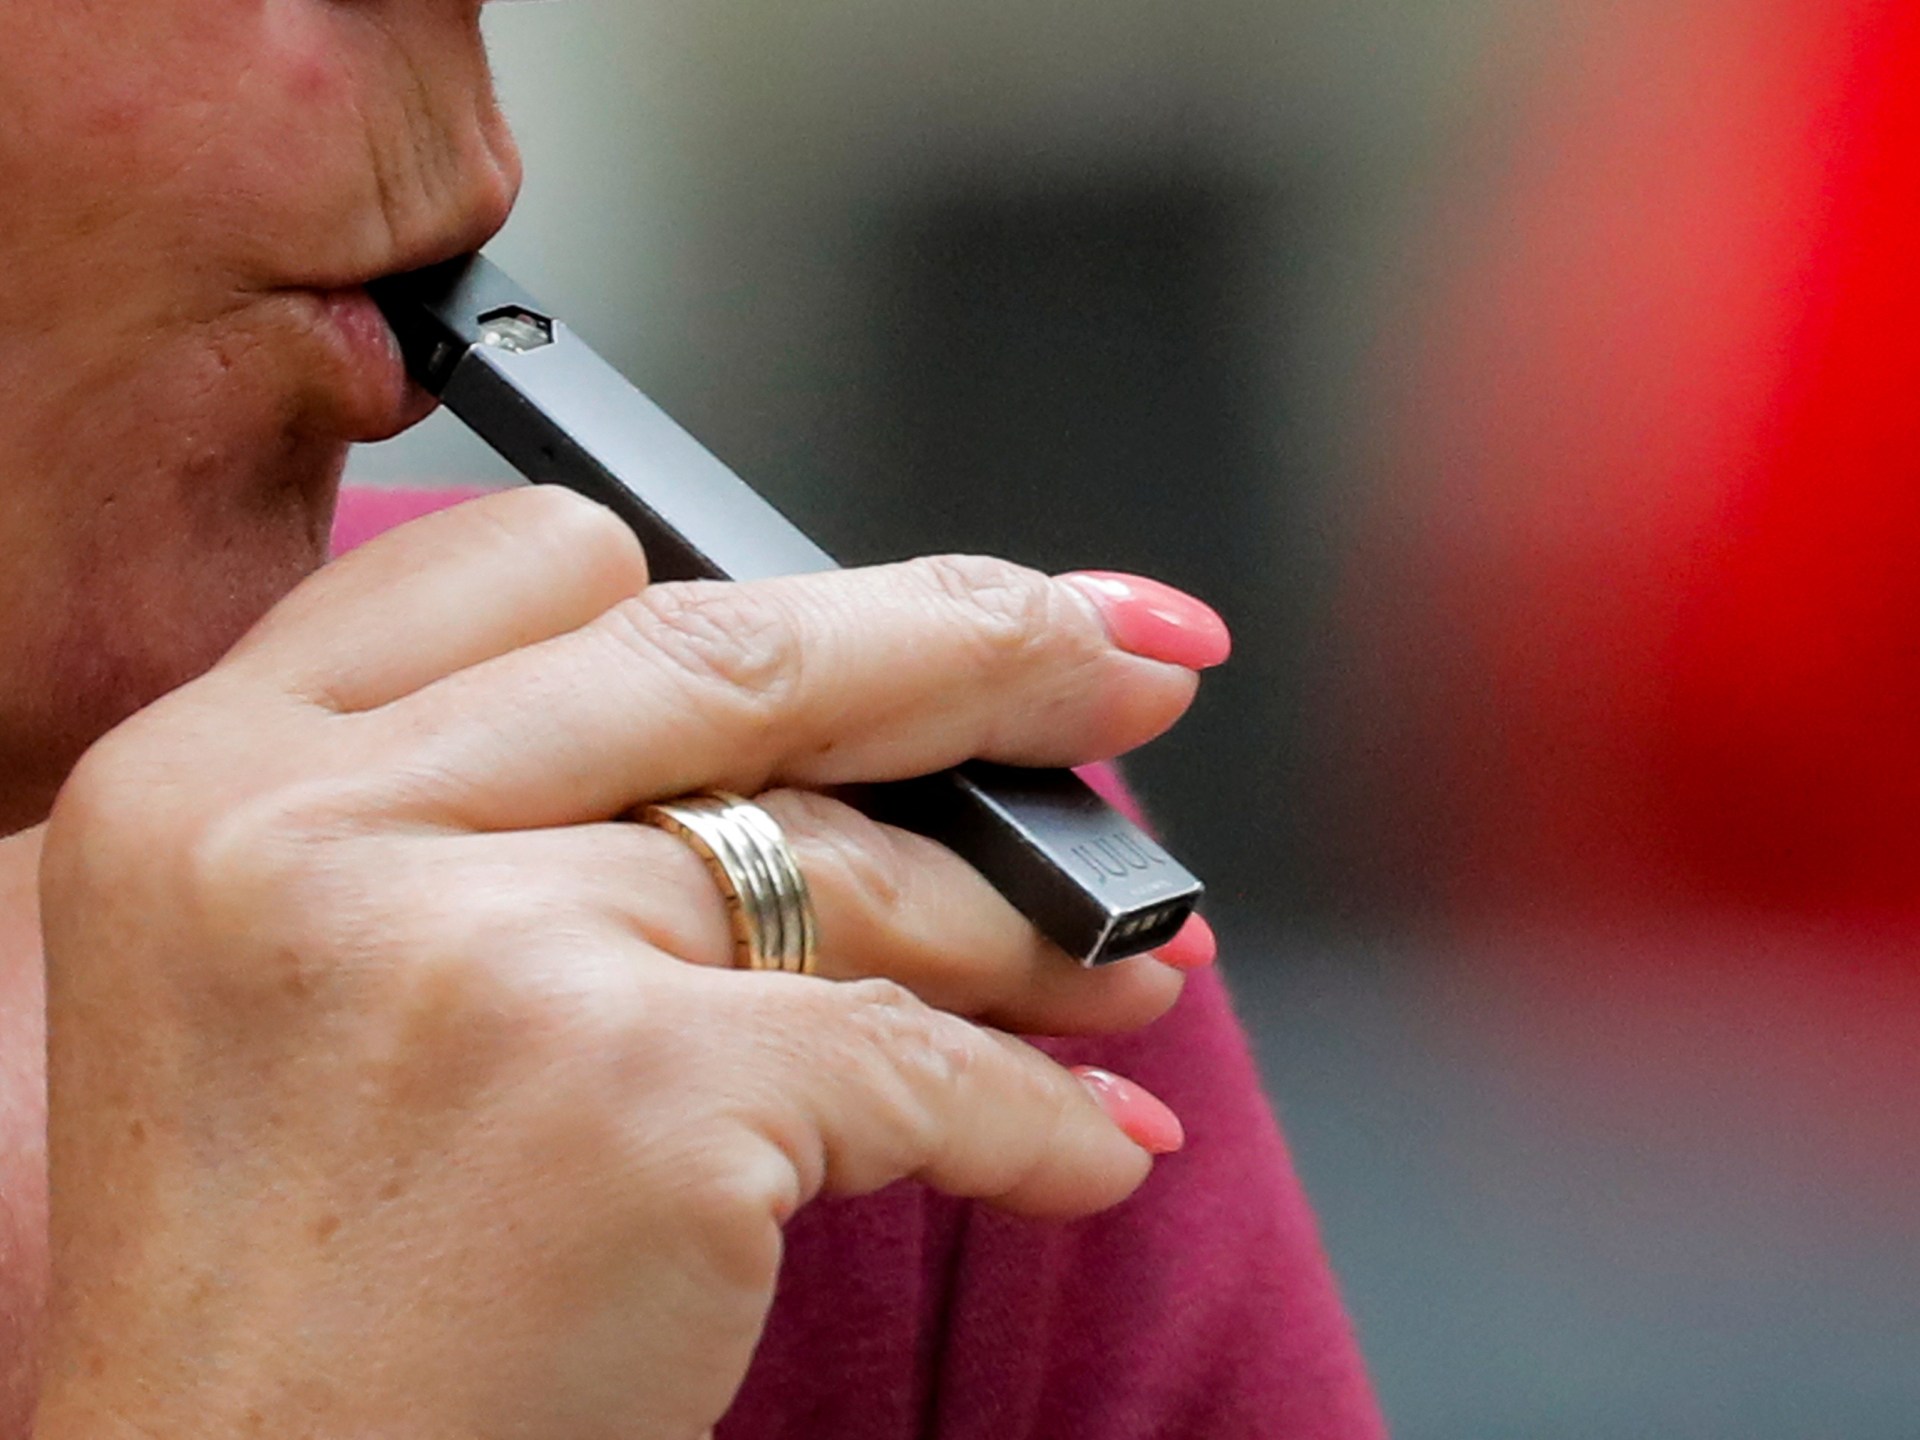 Juul to pay 9m to settle US e-cigarette advertising probe | Business and Economy News